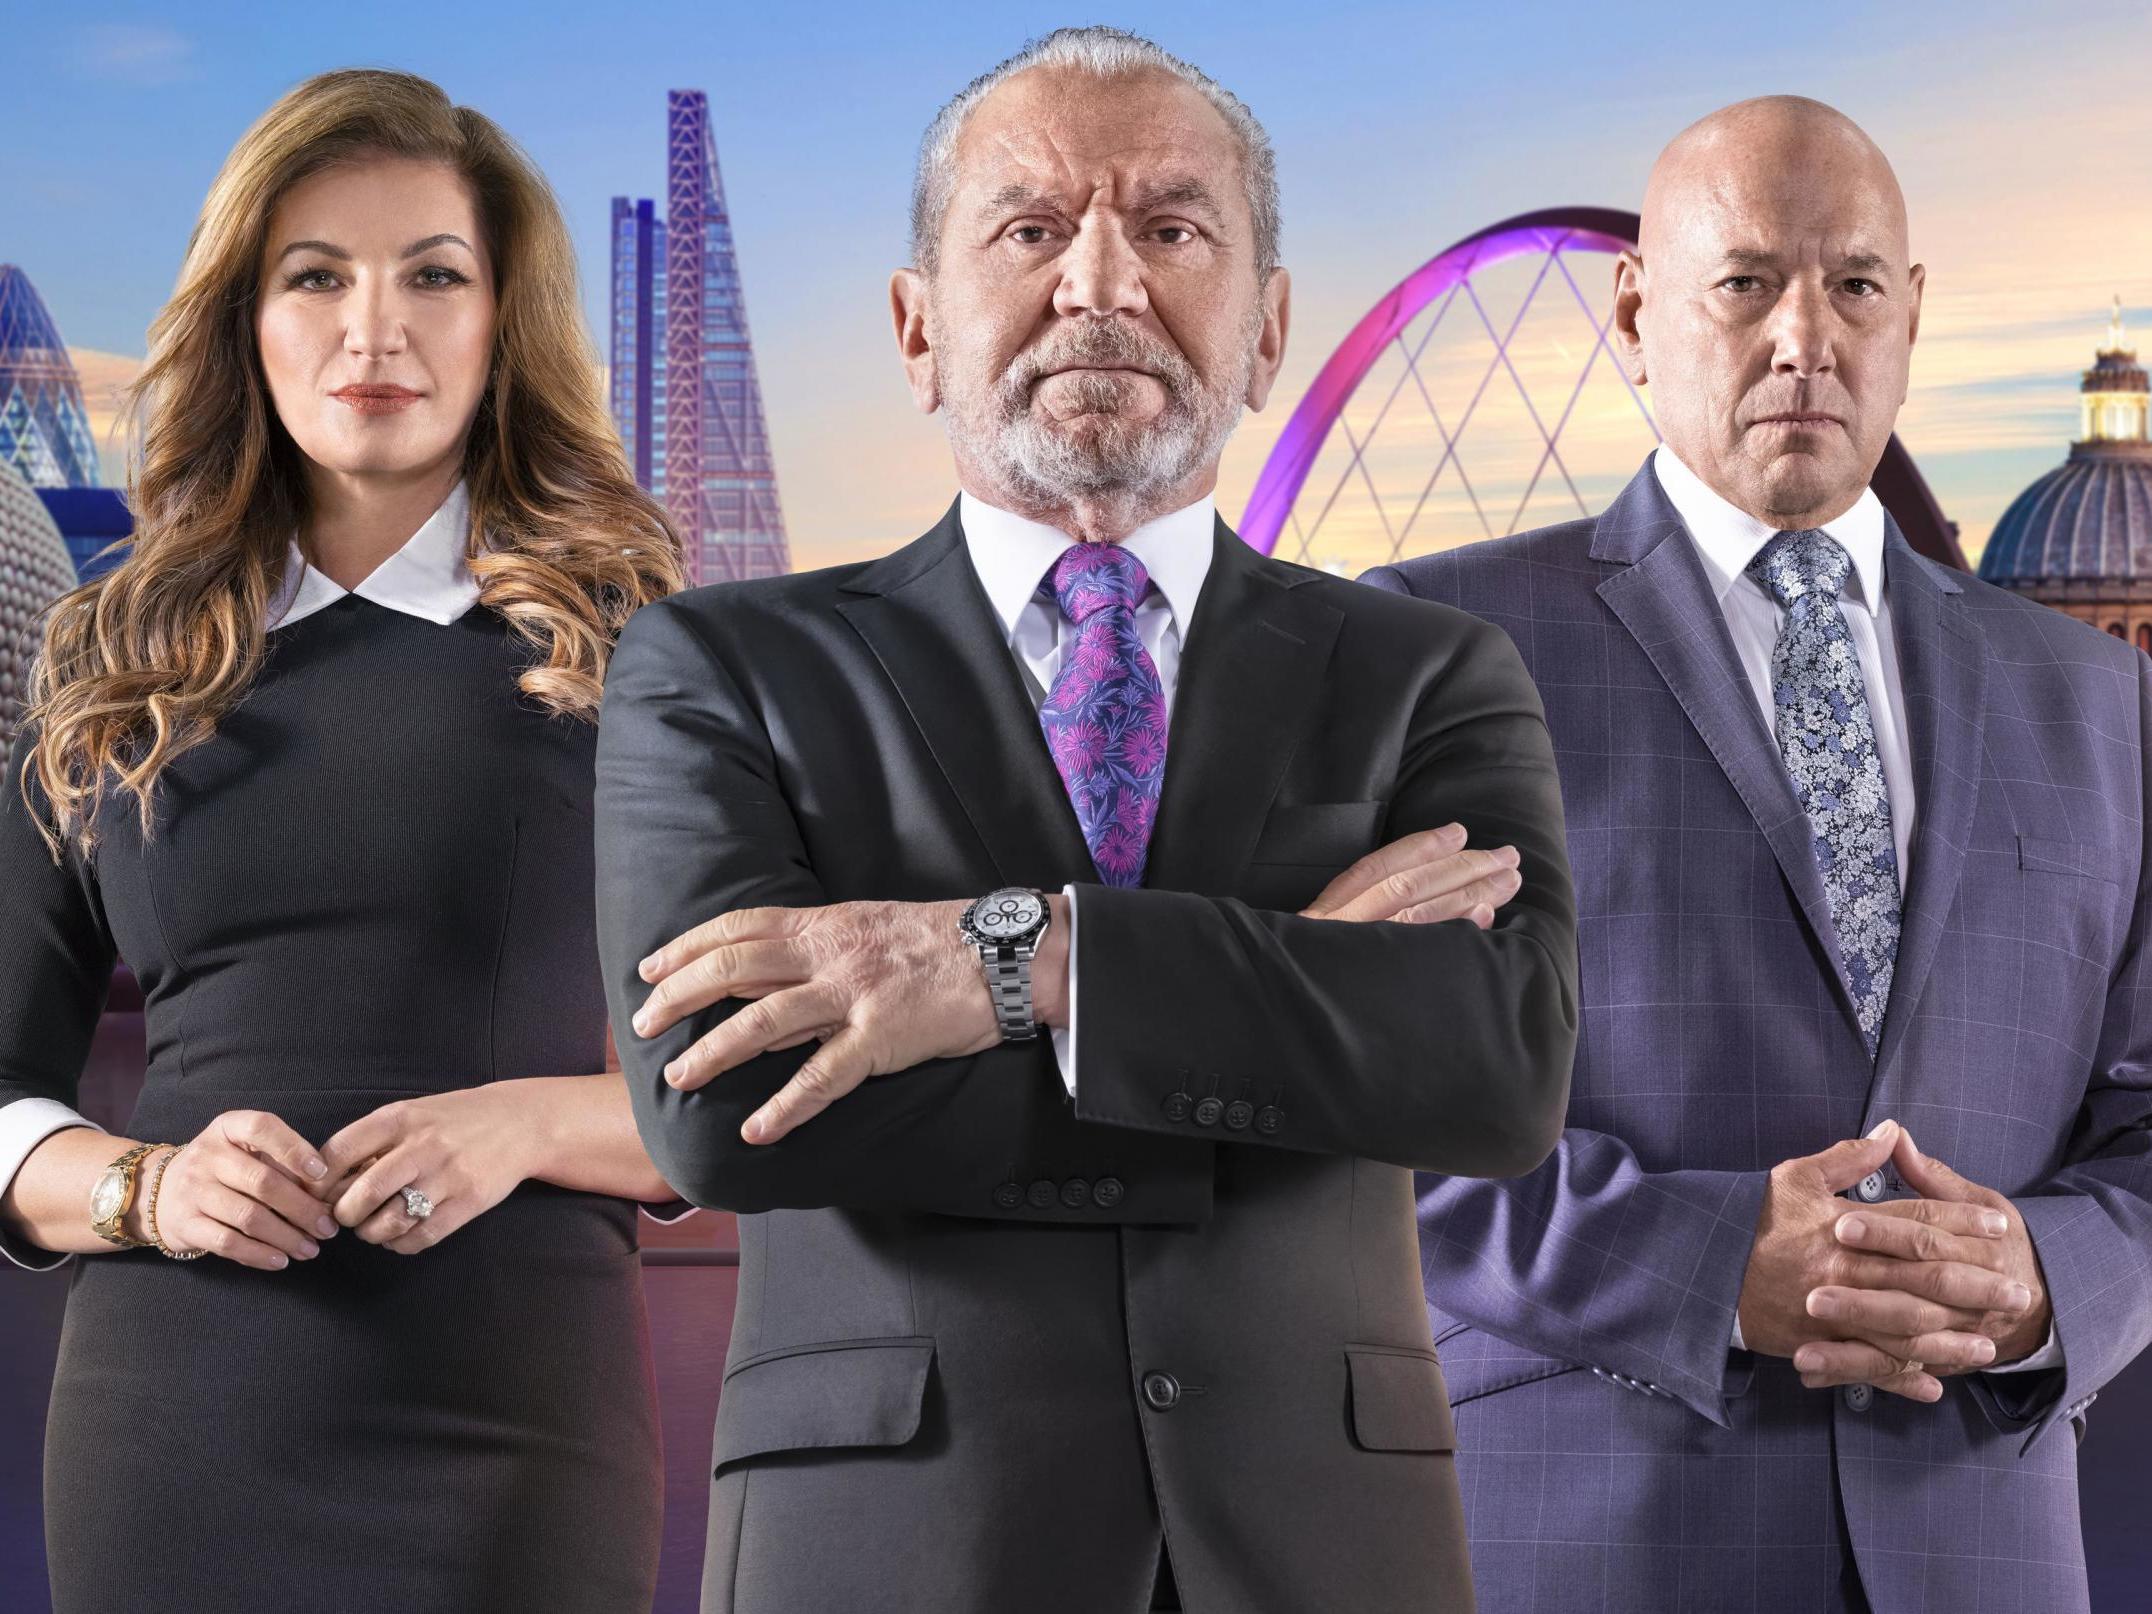 Karren Brady, Lord Sugar and Claude Littner ultimately came up with the most deserving of winners